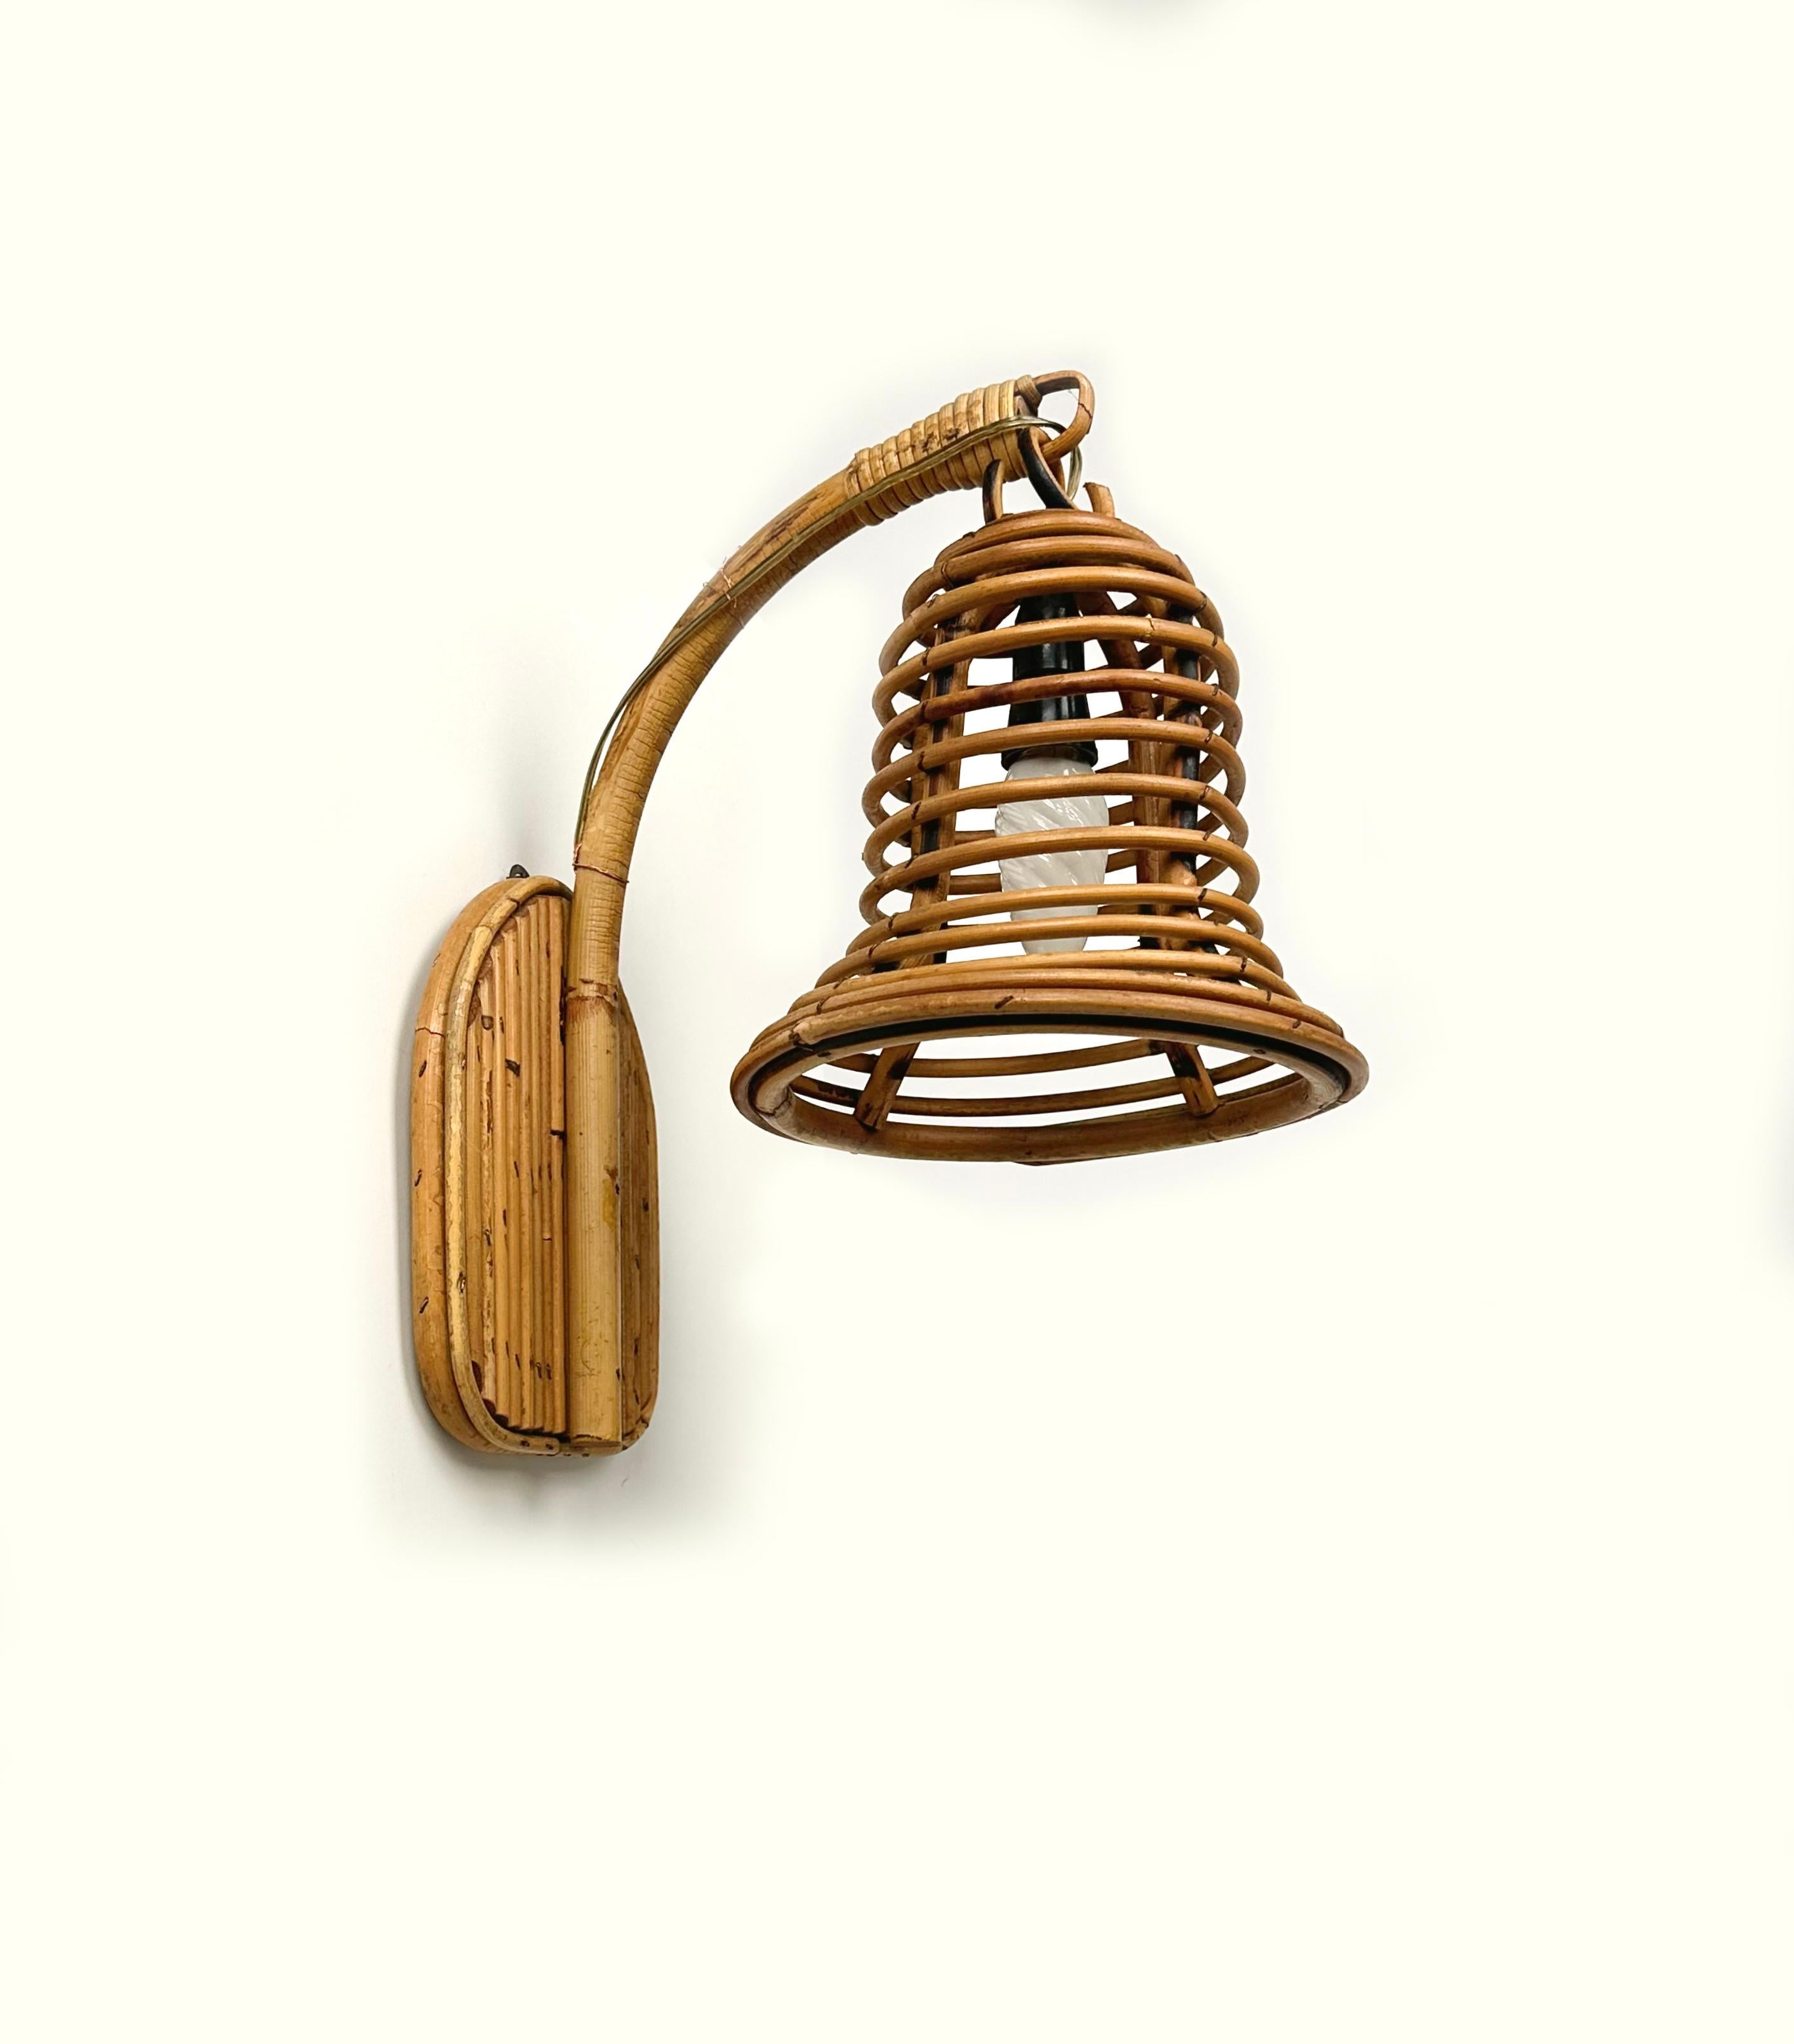 Rattan & Bamboo Sconce Wall Lamp Lantern Louis Sognot Style, Italy, 1960s For Sale 4